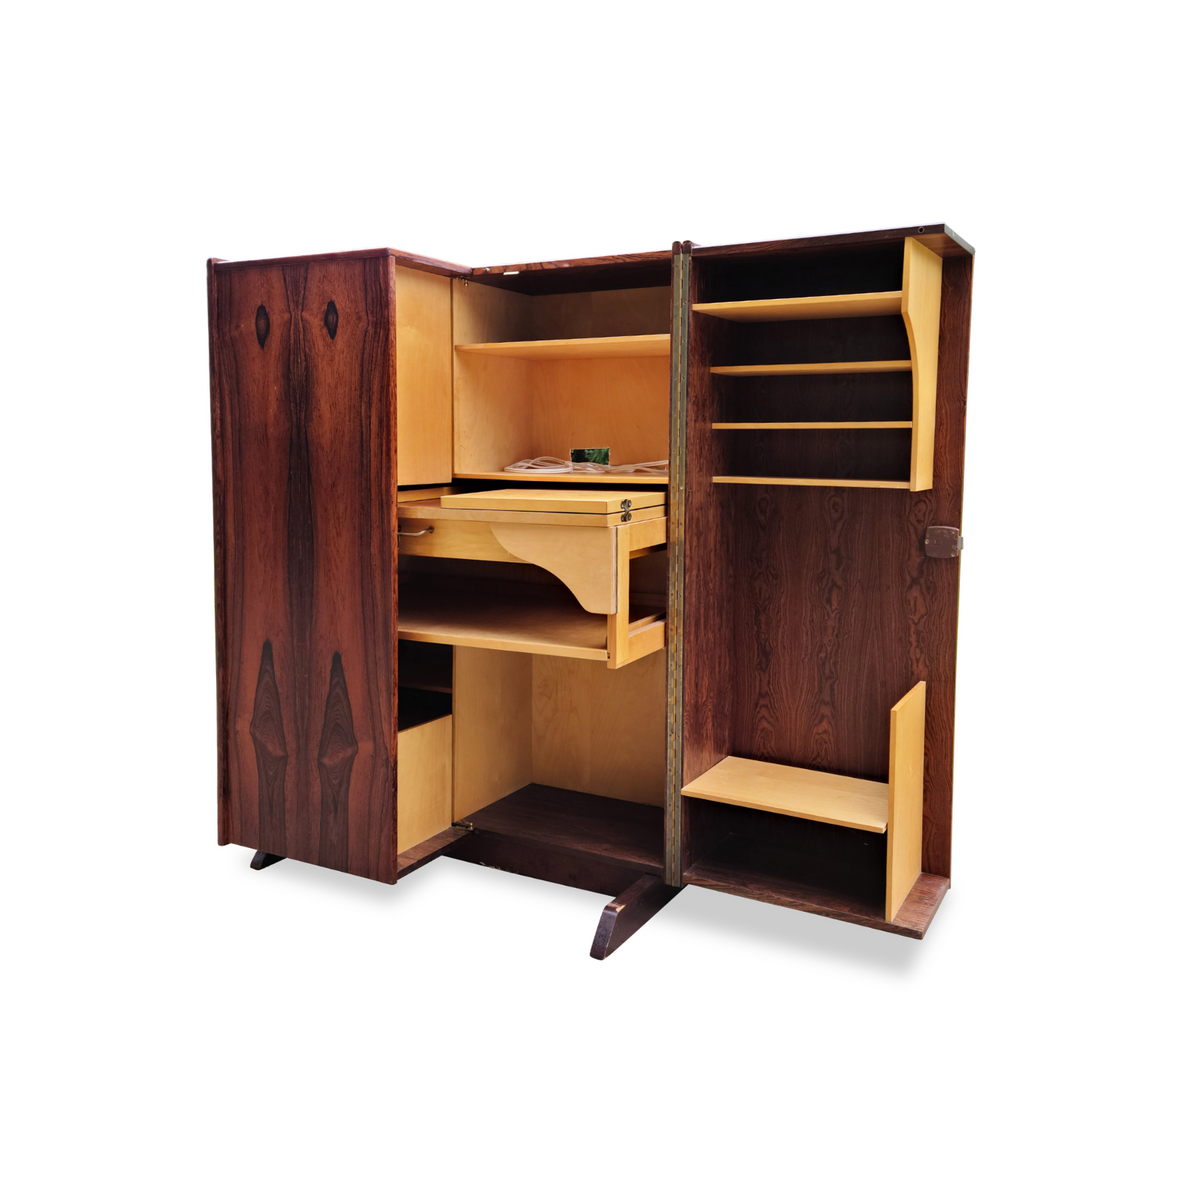 osewood “desk in a box” by Mummenthaler and Meier